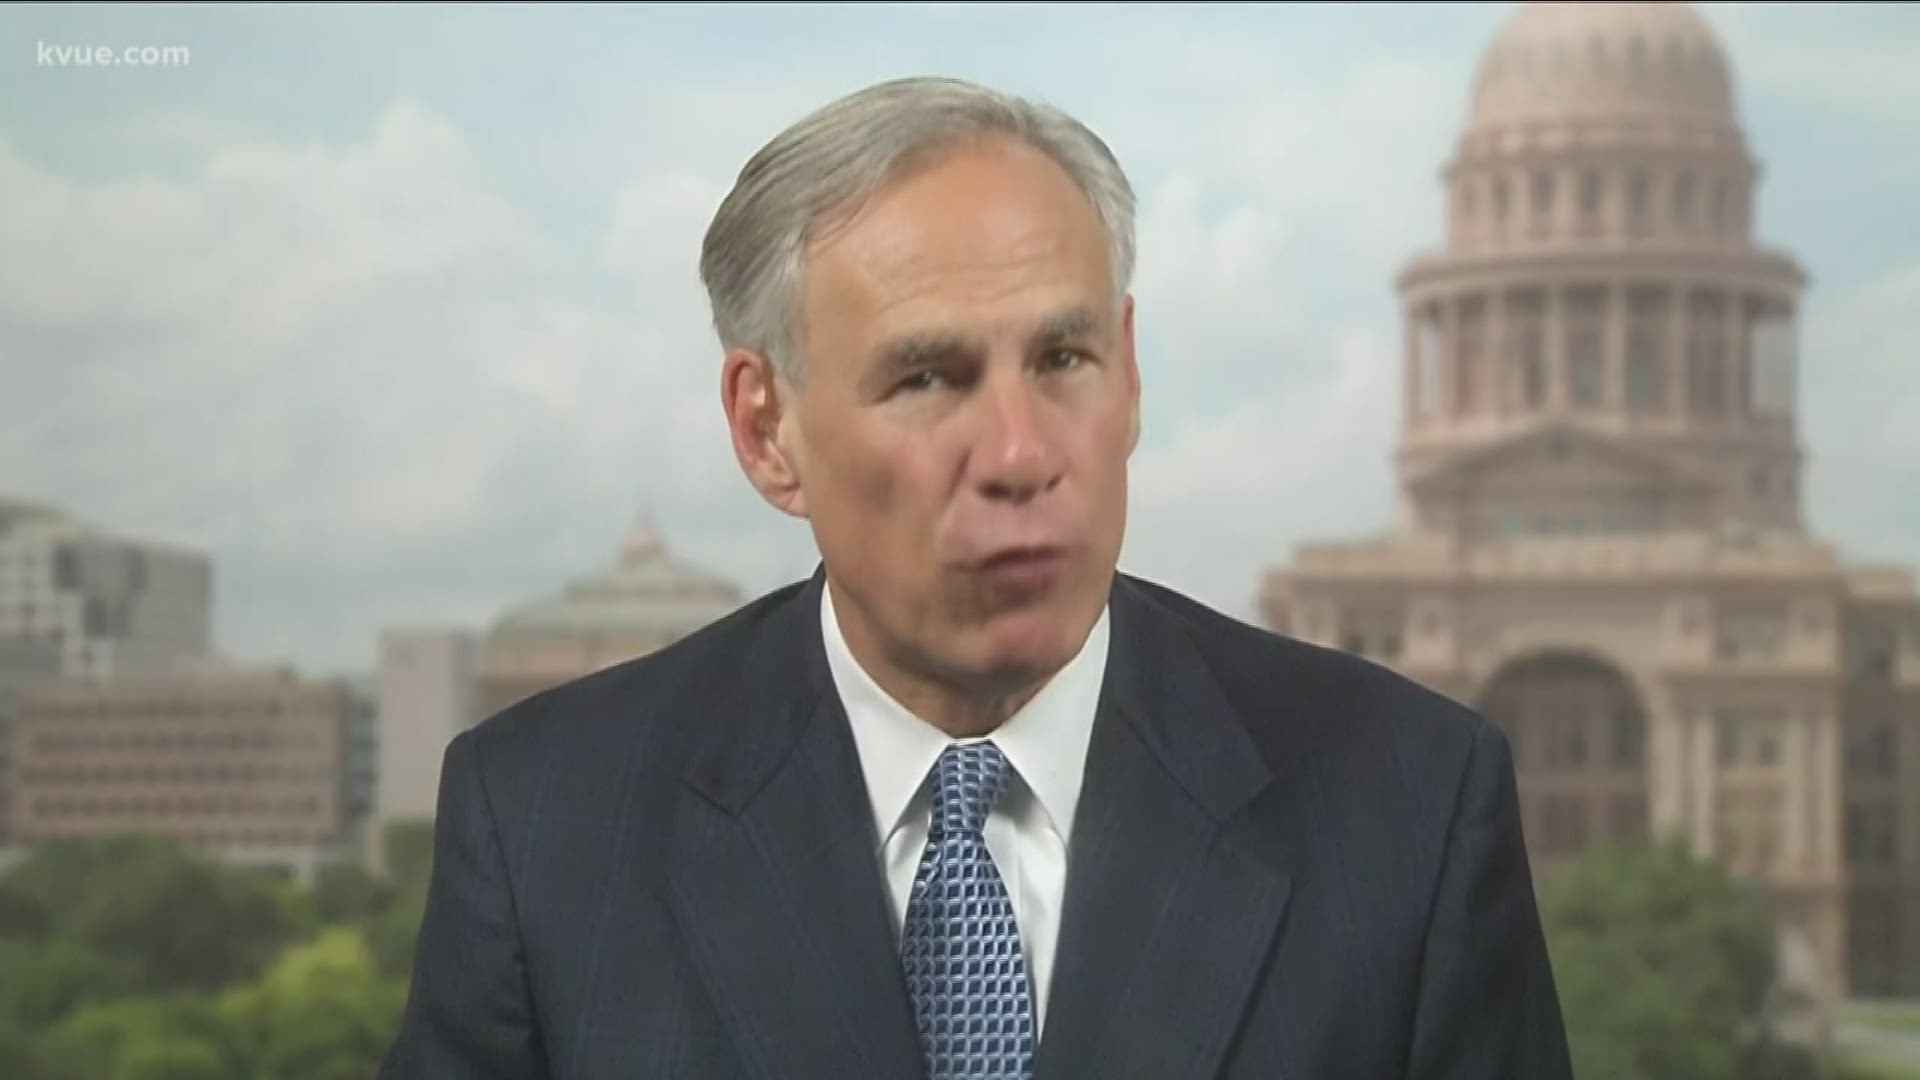 Texas Governor Greg Abbott wants to help ease the burden of high property taxes for Texans. Last week, we told you about his idea to increase the sales tax to buy down property taxes.